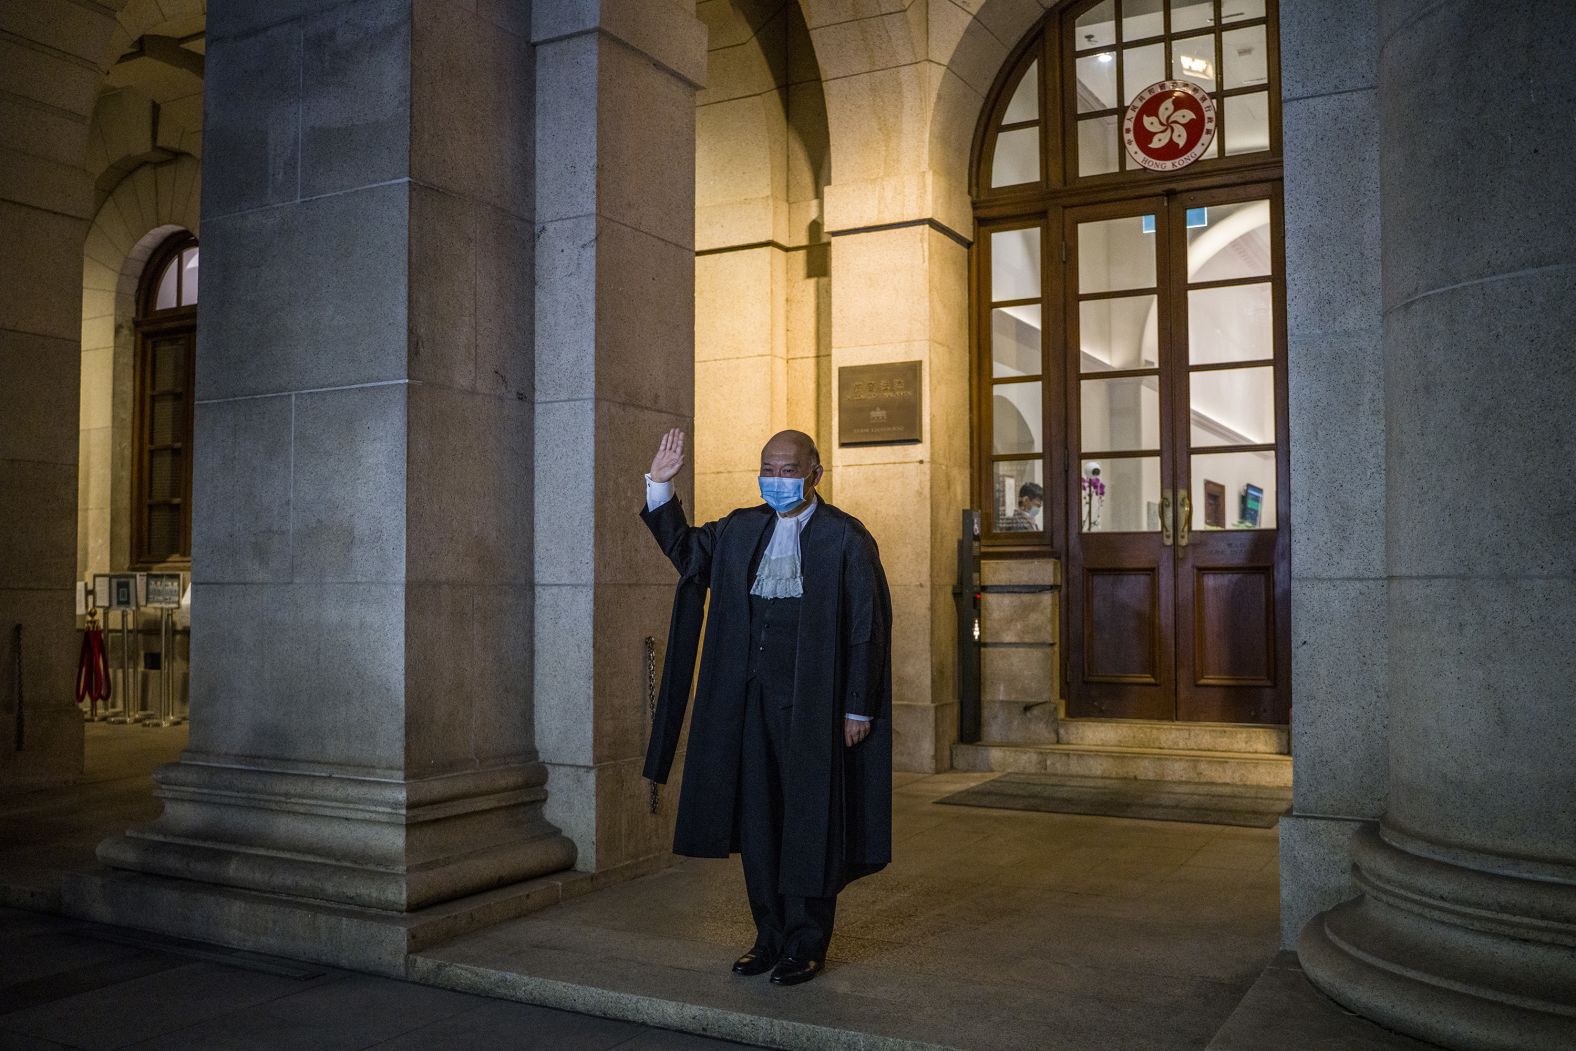 Hong Kong Chief Justice Geoffrey Ma stands in front of the Court of Final Appeal Building on January 6, 2021. Two days later, he retired from the role after 10 years of service.